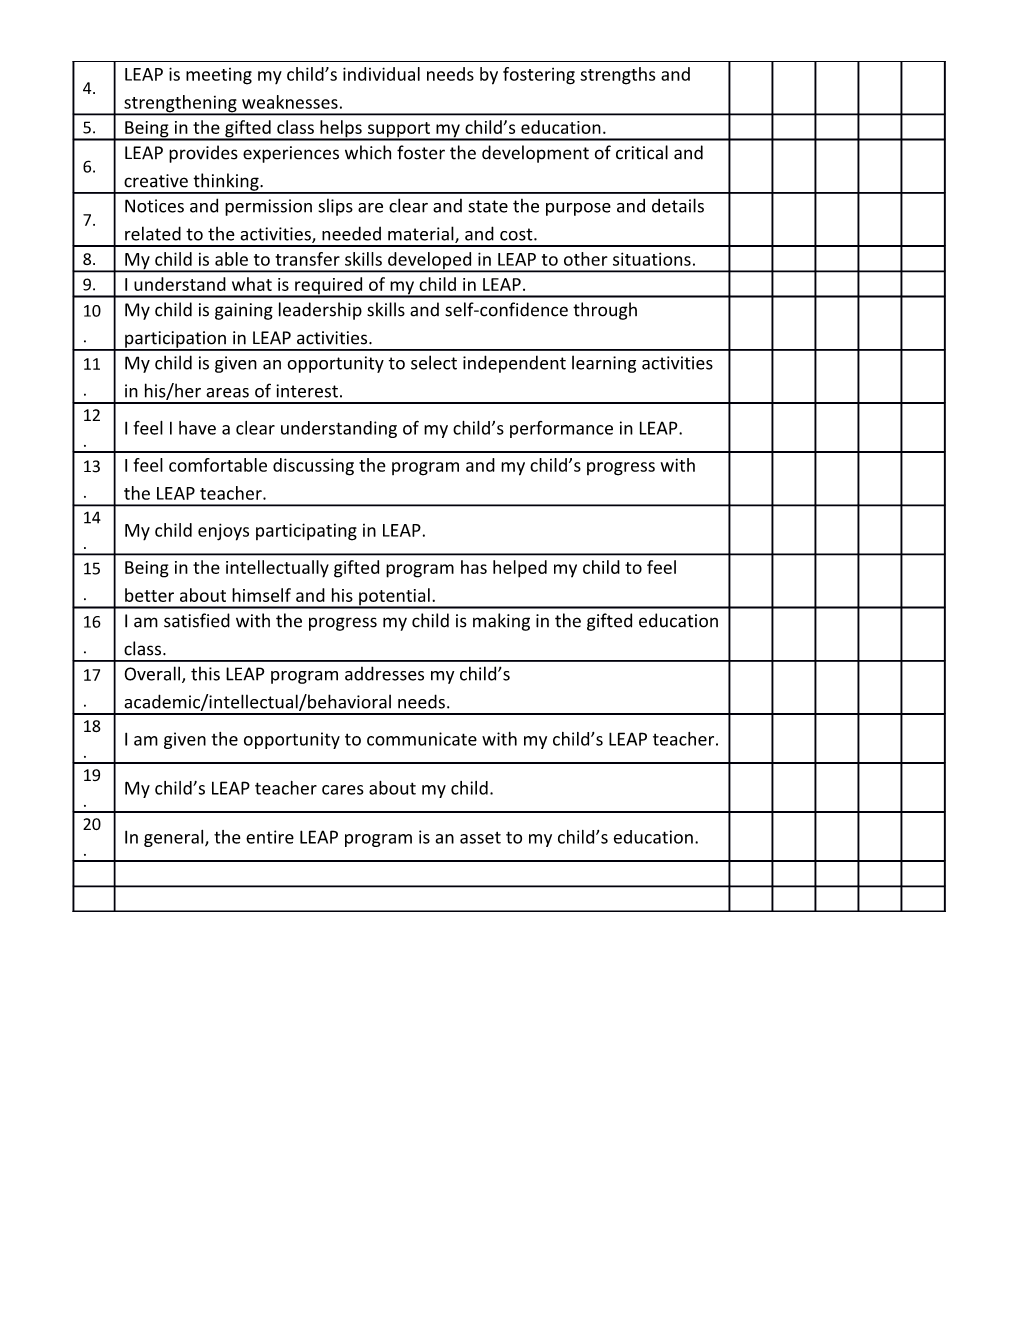 Parent Survey for Gifted Students